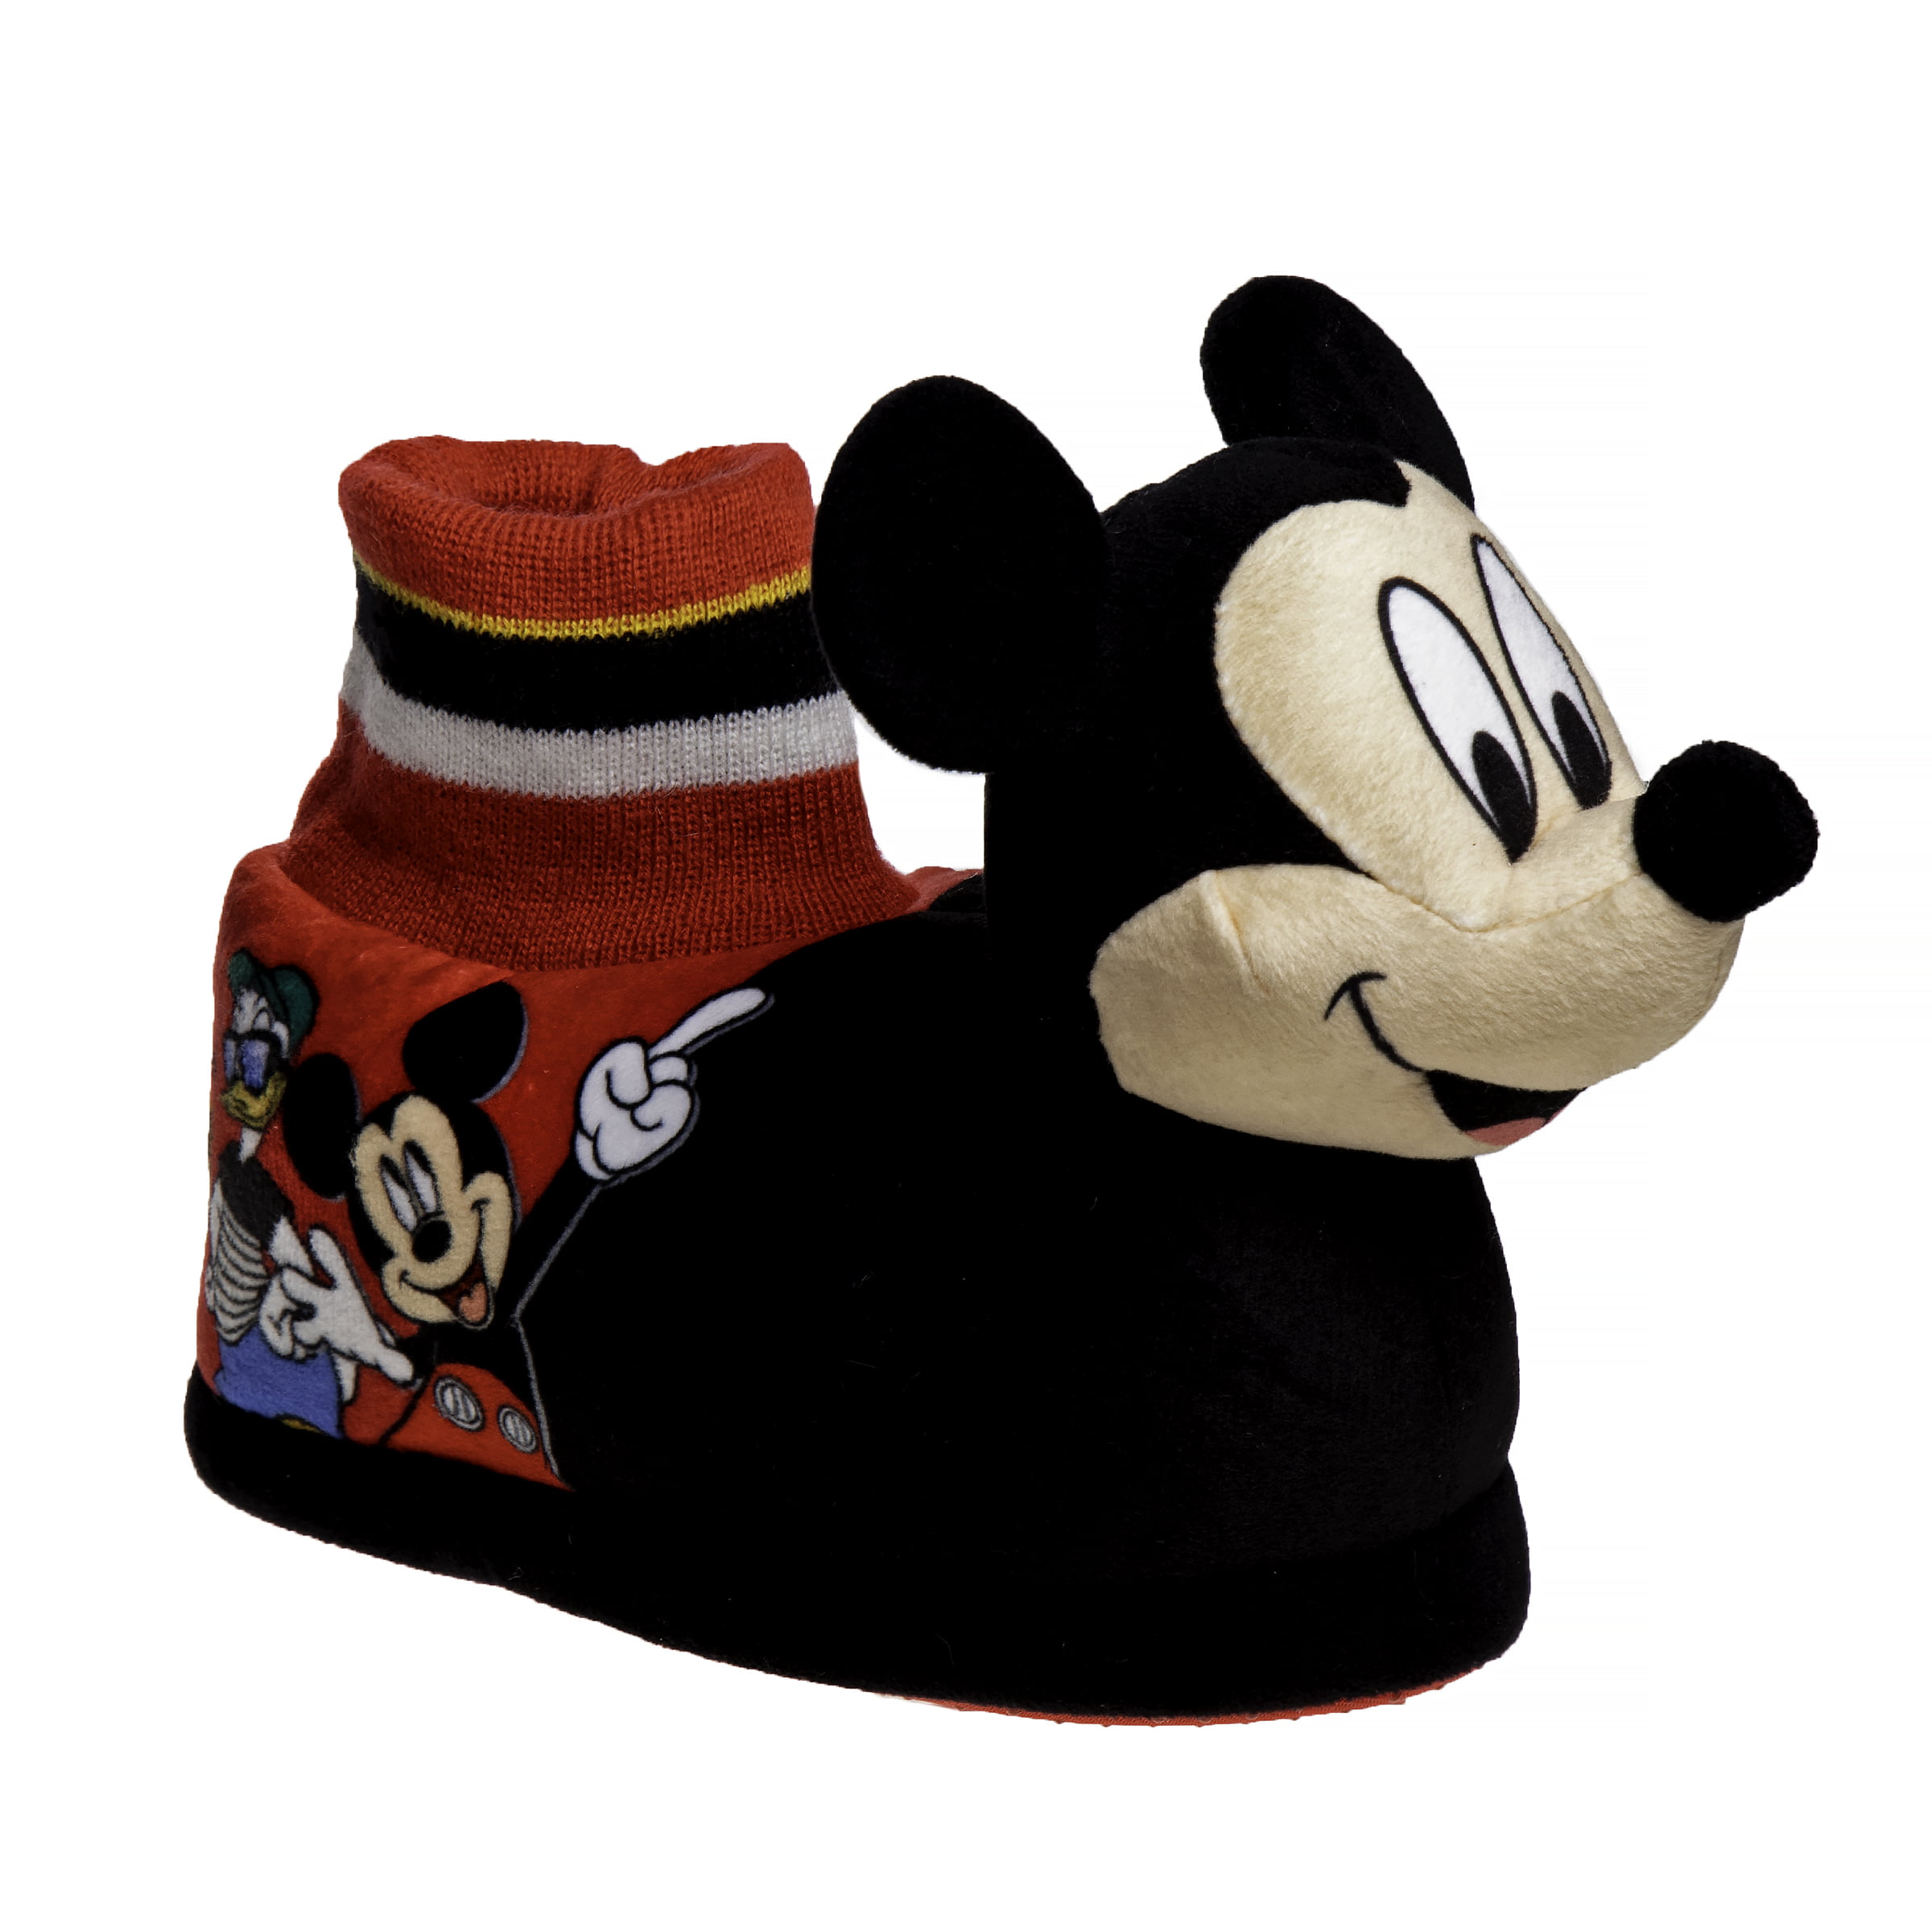 New Toddler Mickey Mouse Boot Slippers size 9-10 Disney Boys Hard Sole 